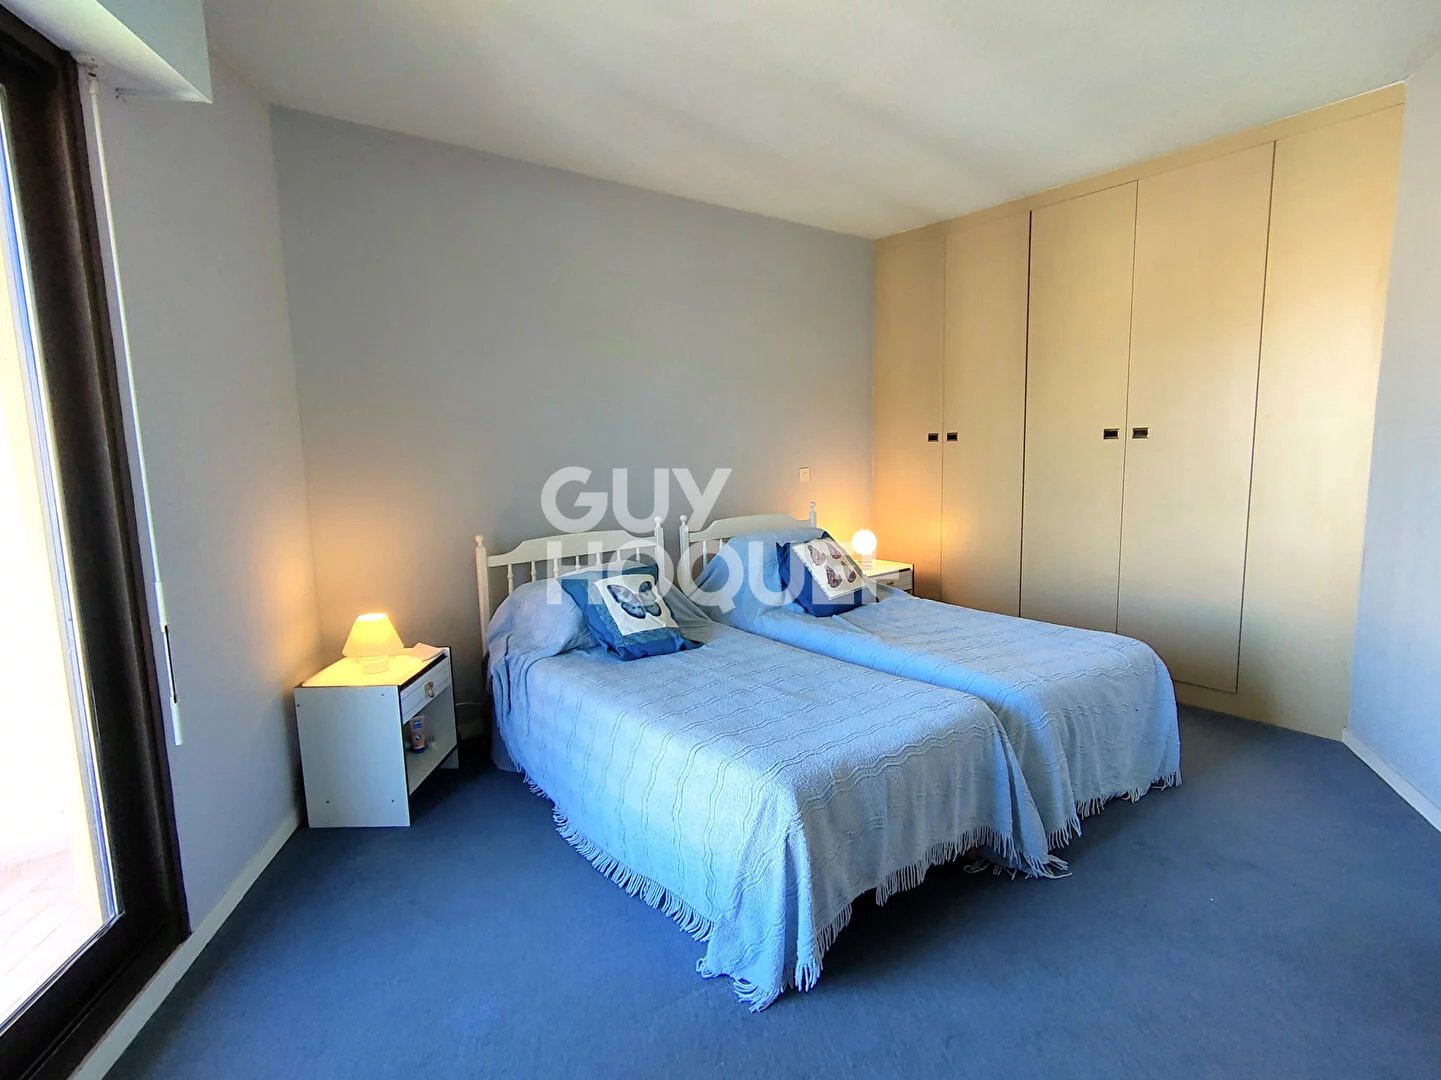 RARE : APARTMENT 2 BEDROOMS FOR SALE 85 SQM WITH GARAGE AND CELLAR IN SECURED RESIDENCE WITH SWIMMINGPOOL;